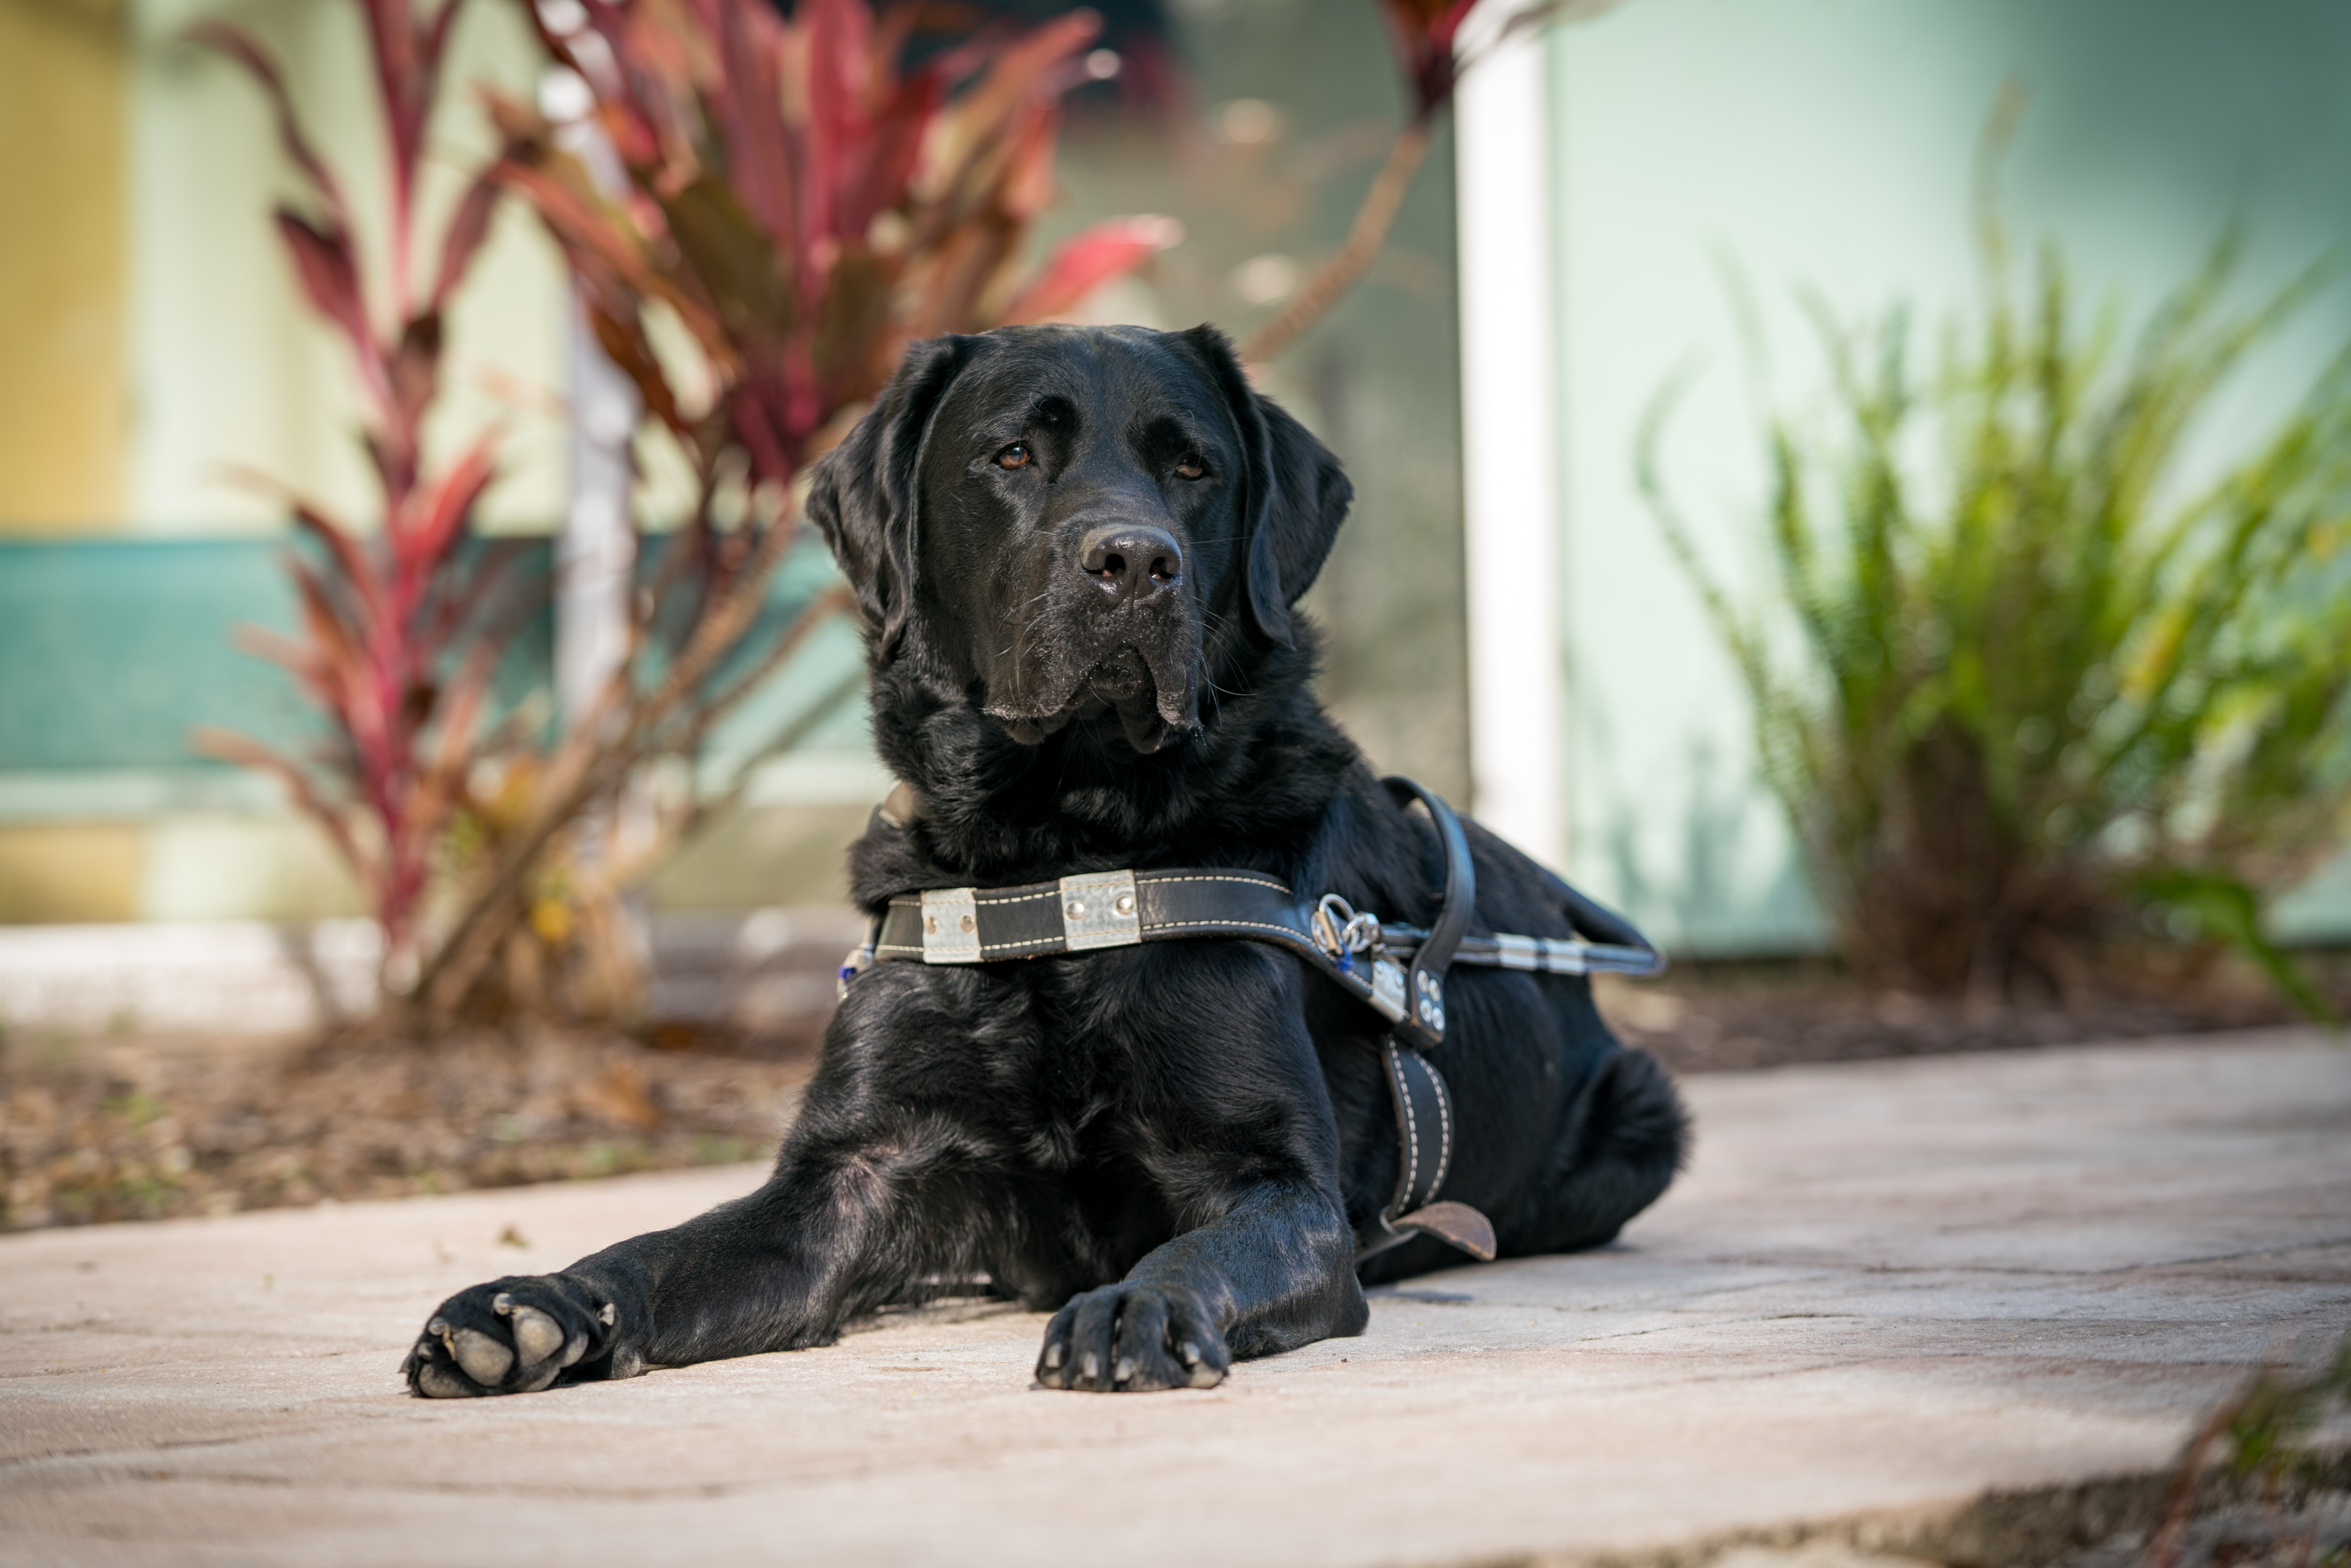 A black Labrador laying outside a Dogs Inc building.